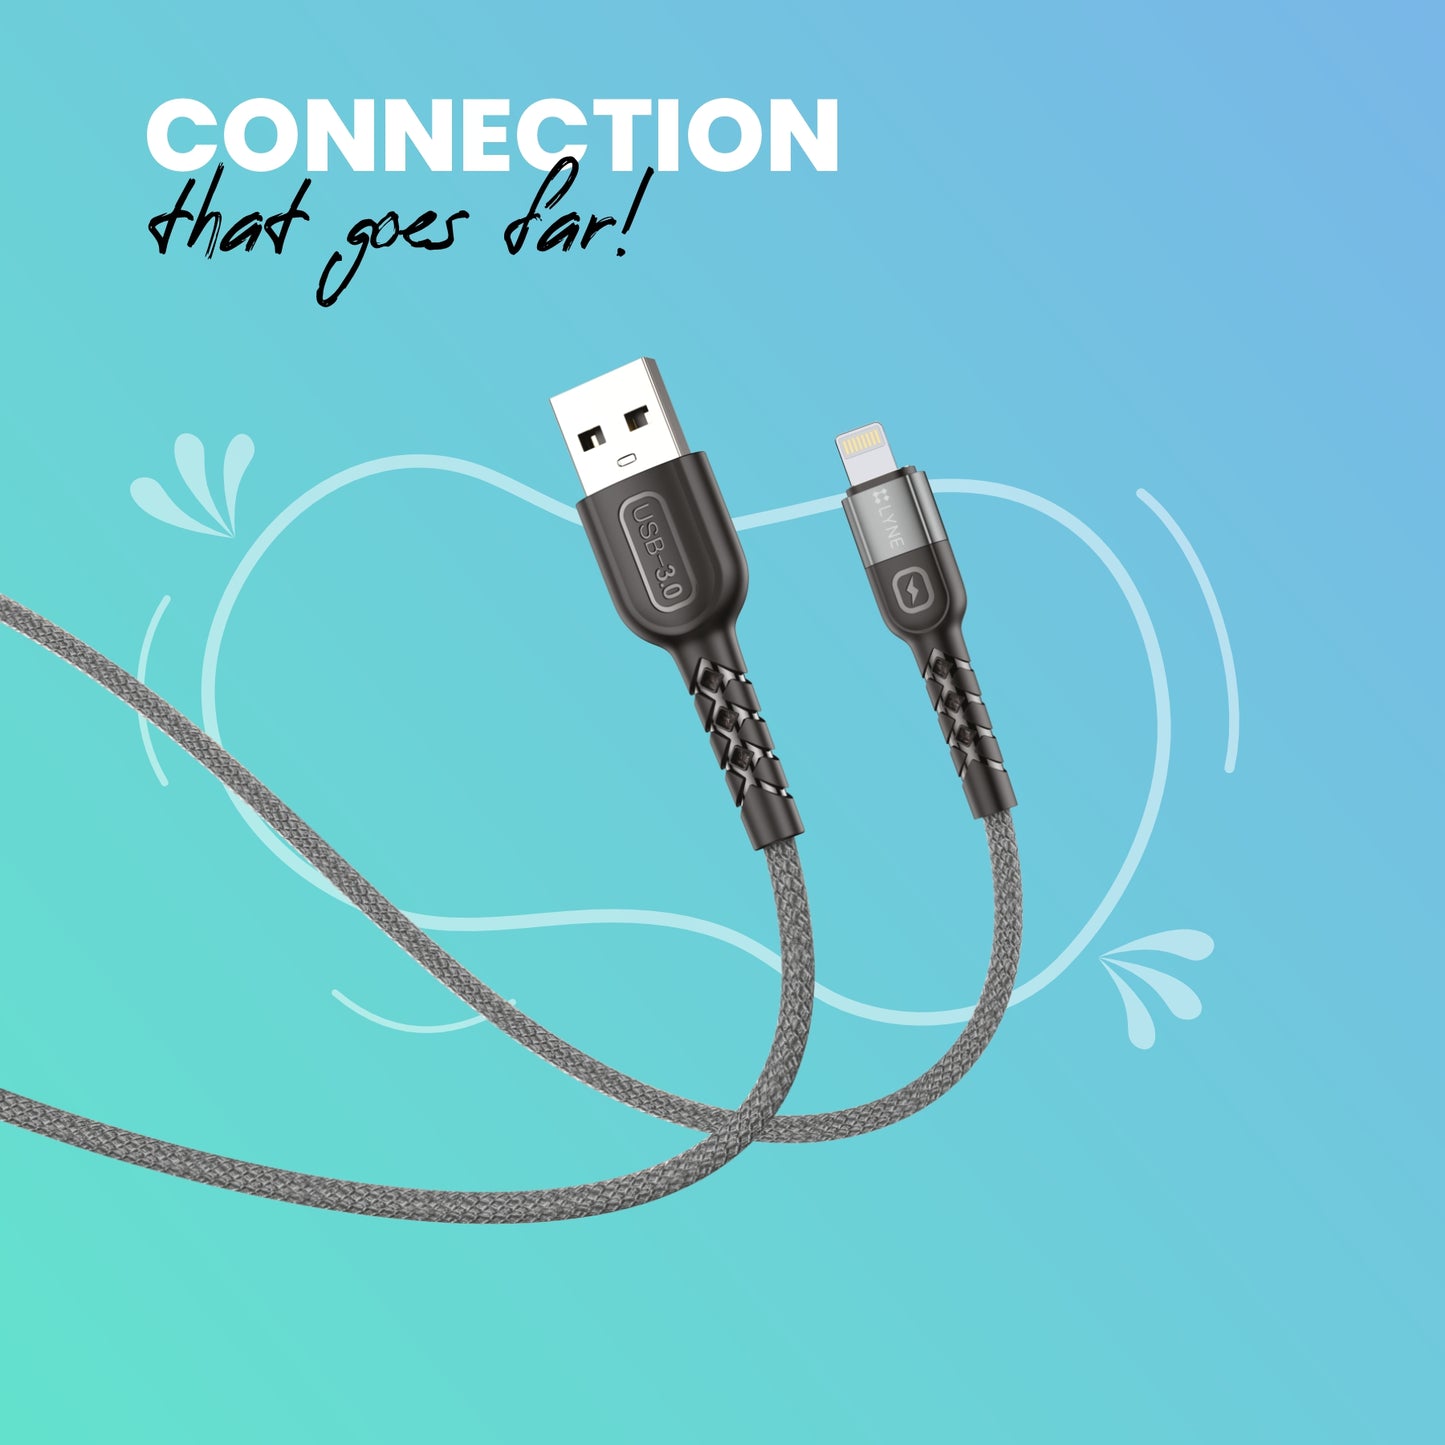 LYNE Flexy 6 4A Output, 1 m, Lightning High Quality Braided Data Cable with 50k+ Bend Test